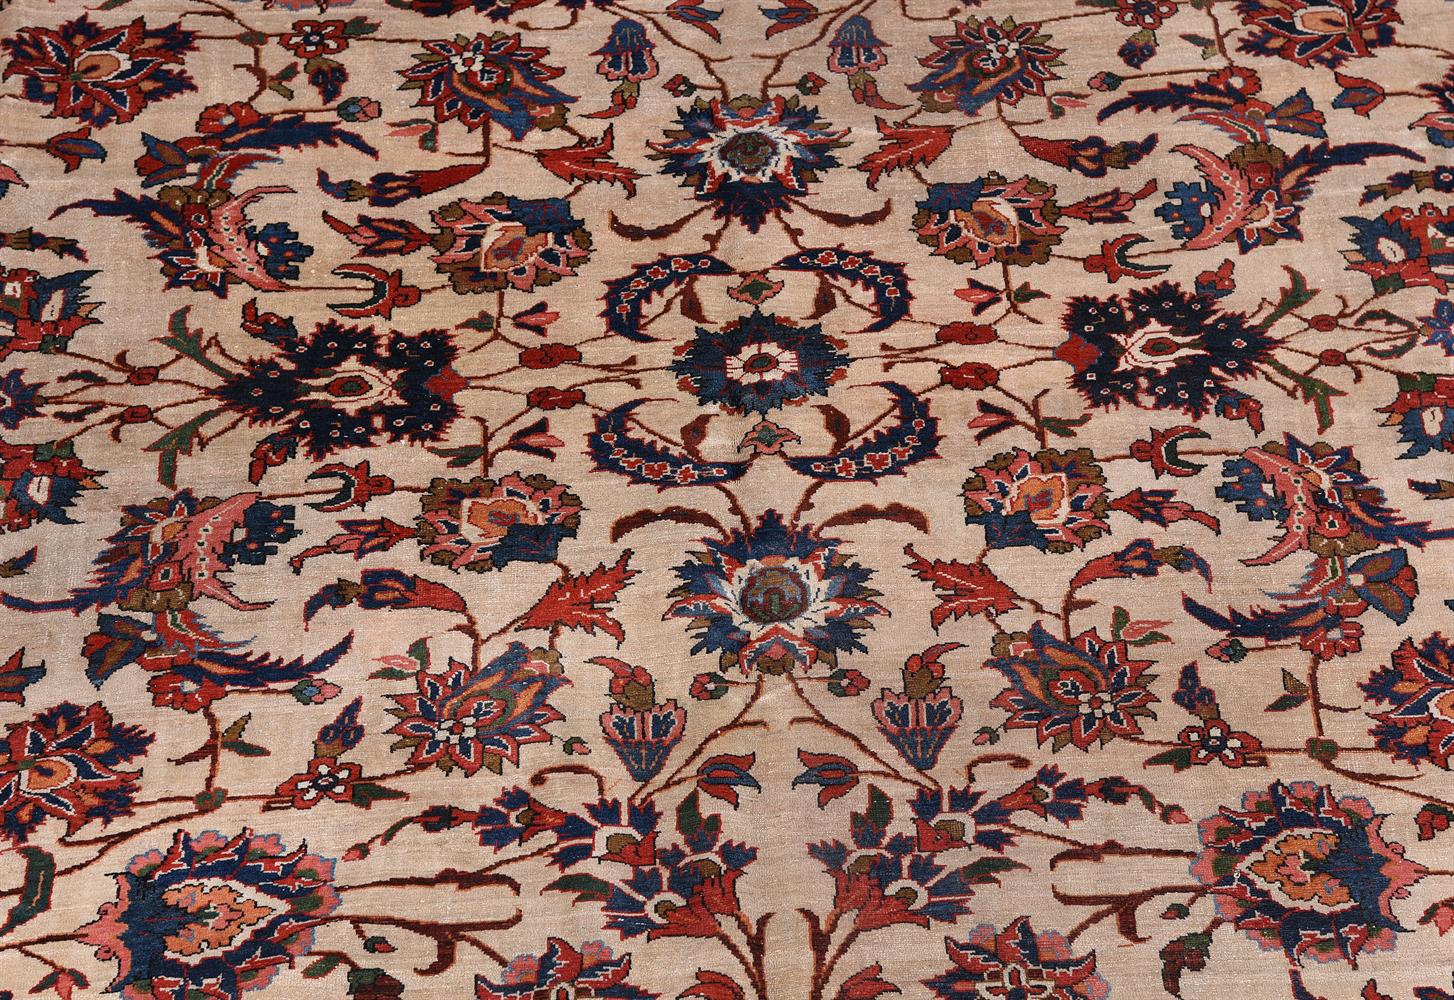 AN ISFAHAN CARPET, approximately 414 x 315cm - Image 2 of 3